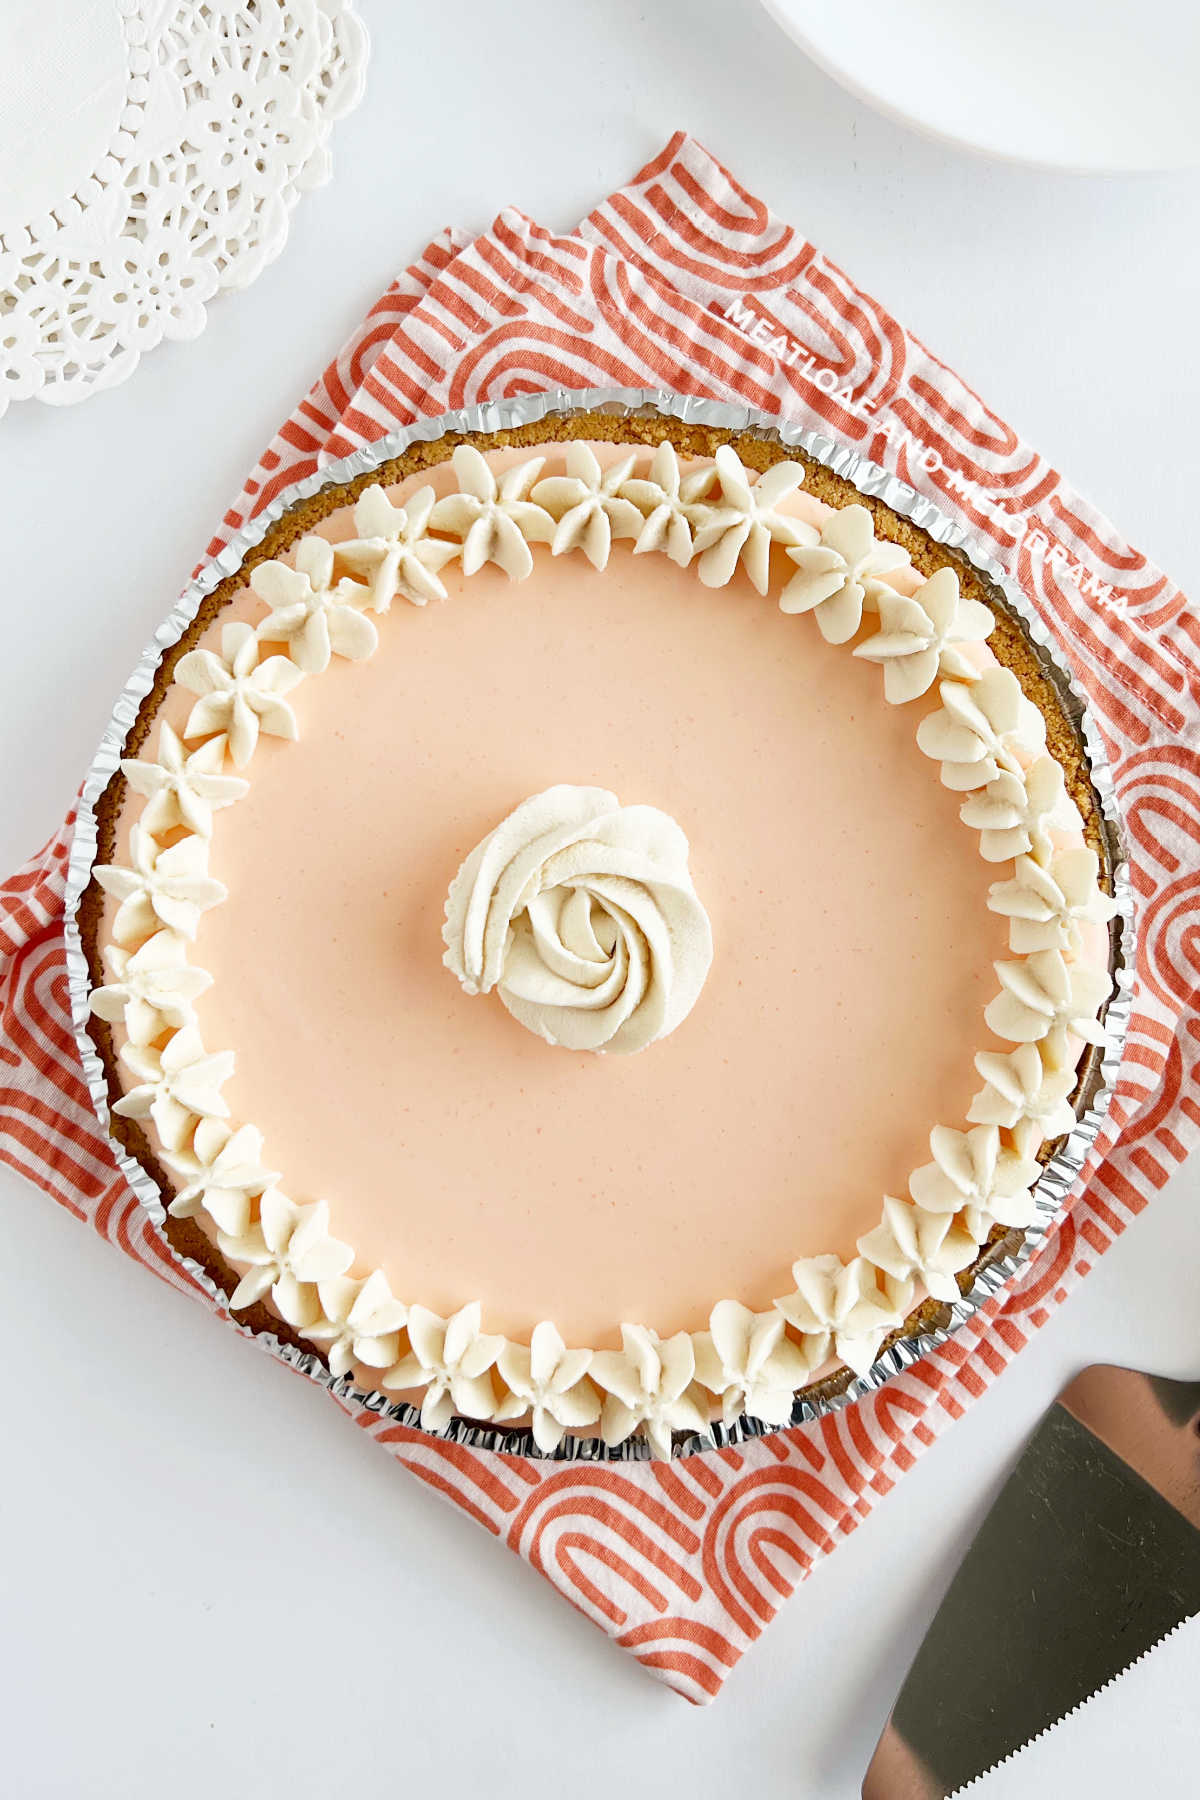 overhead view of no bake creamsicle pie decorated with whipped cream rose and stars